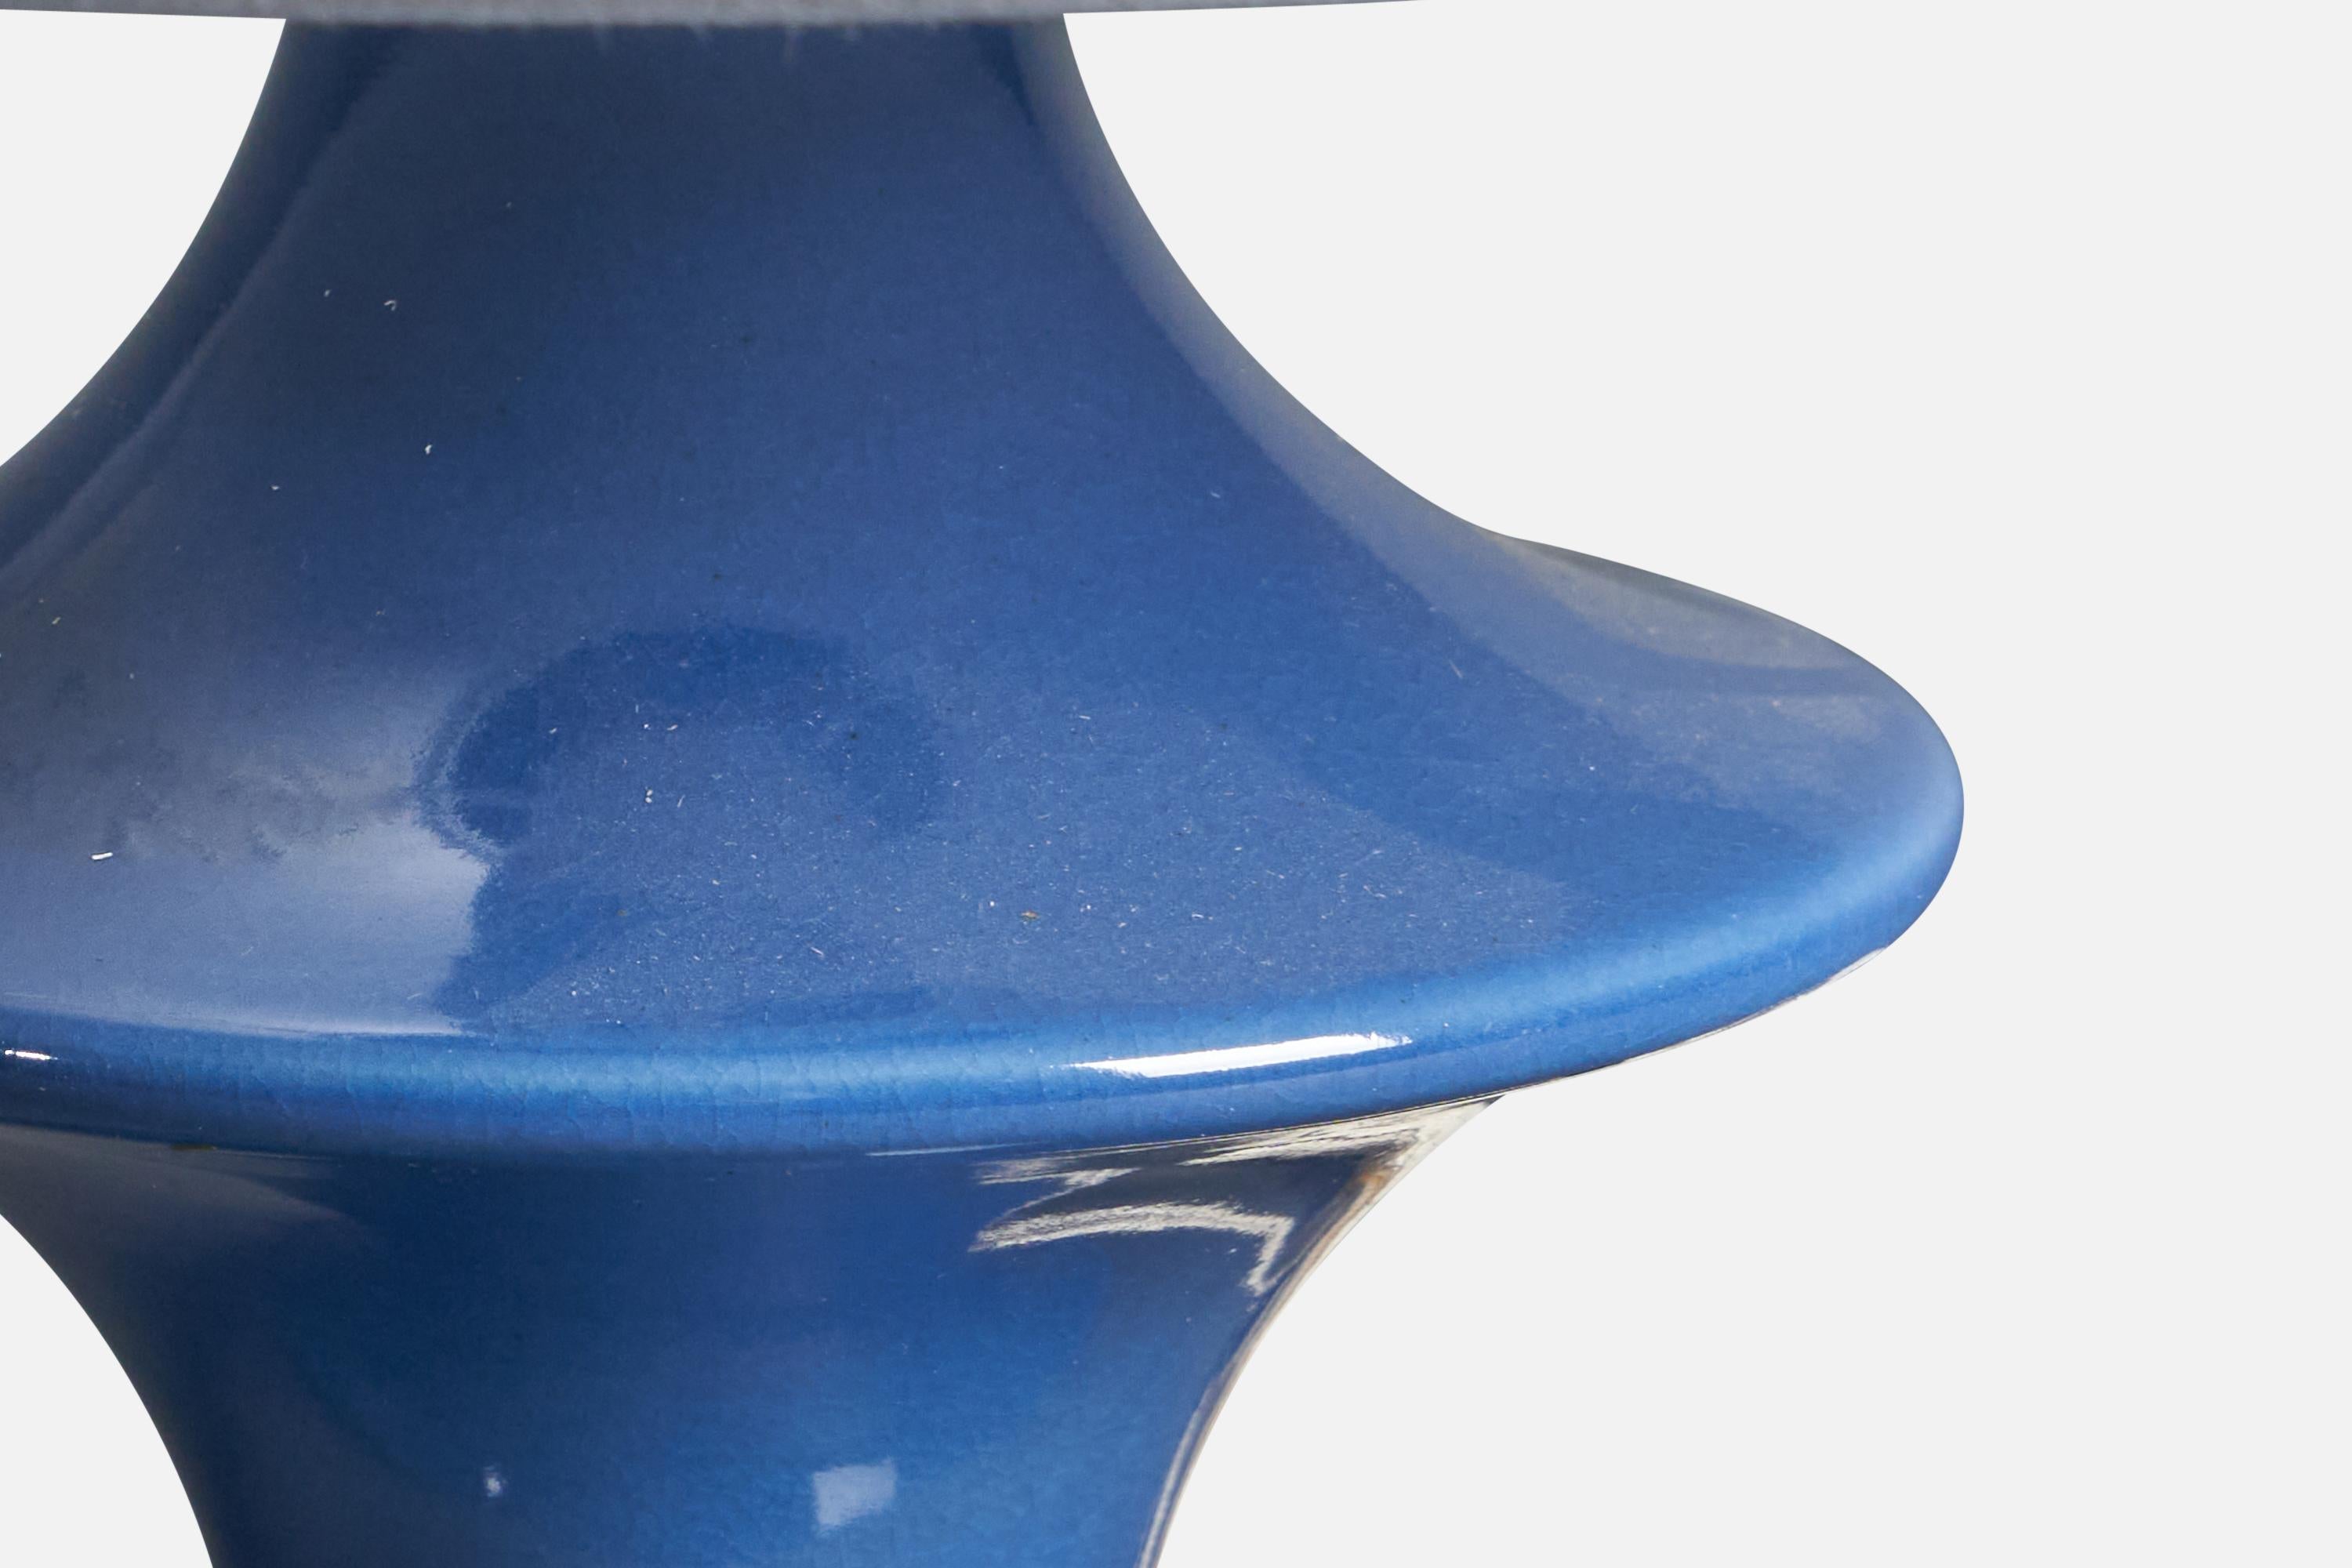 A blue-glazed stoneware table lamp designed and produced by Hasle Keramik, Bornholm, Denmark, 1960s.

Dimensions of Lamp (inches): 9.25